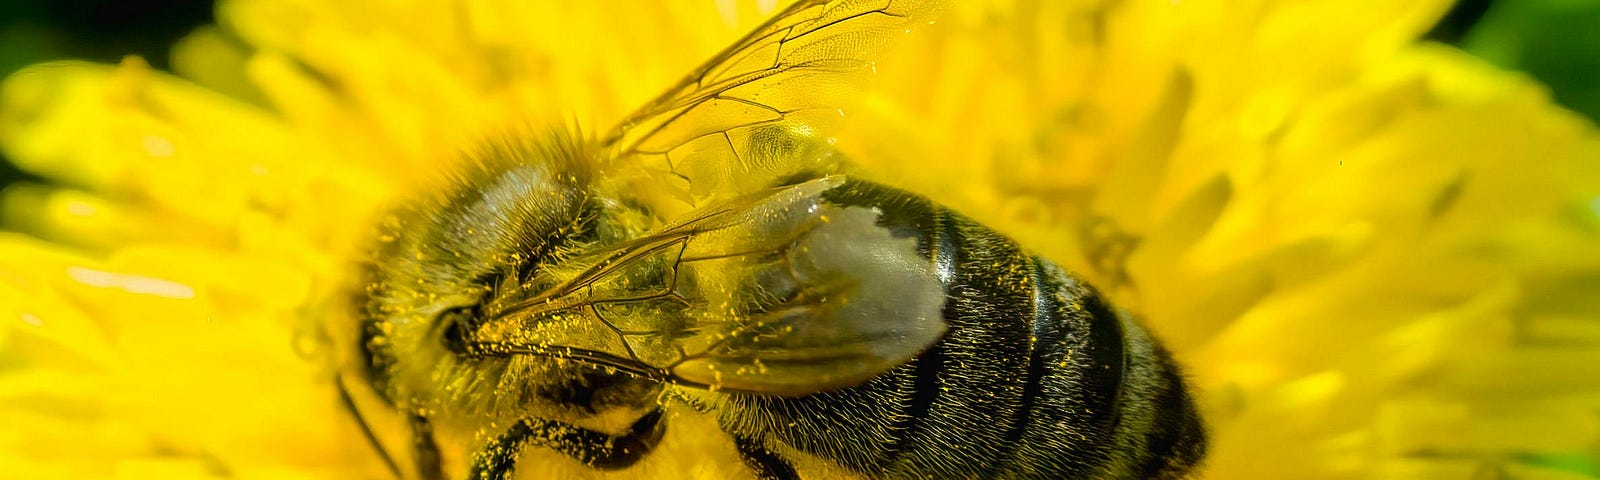 Close-up photograph of a bee feeding from a beautiful bright yellow dandelion flower in full sunlight.